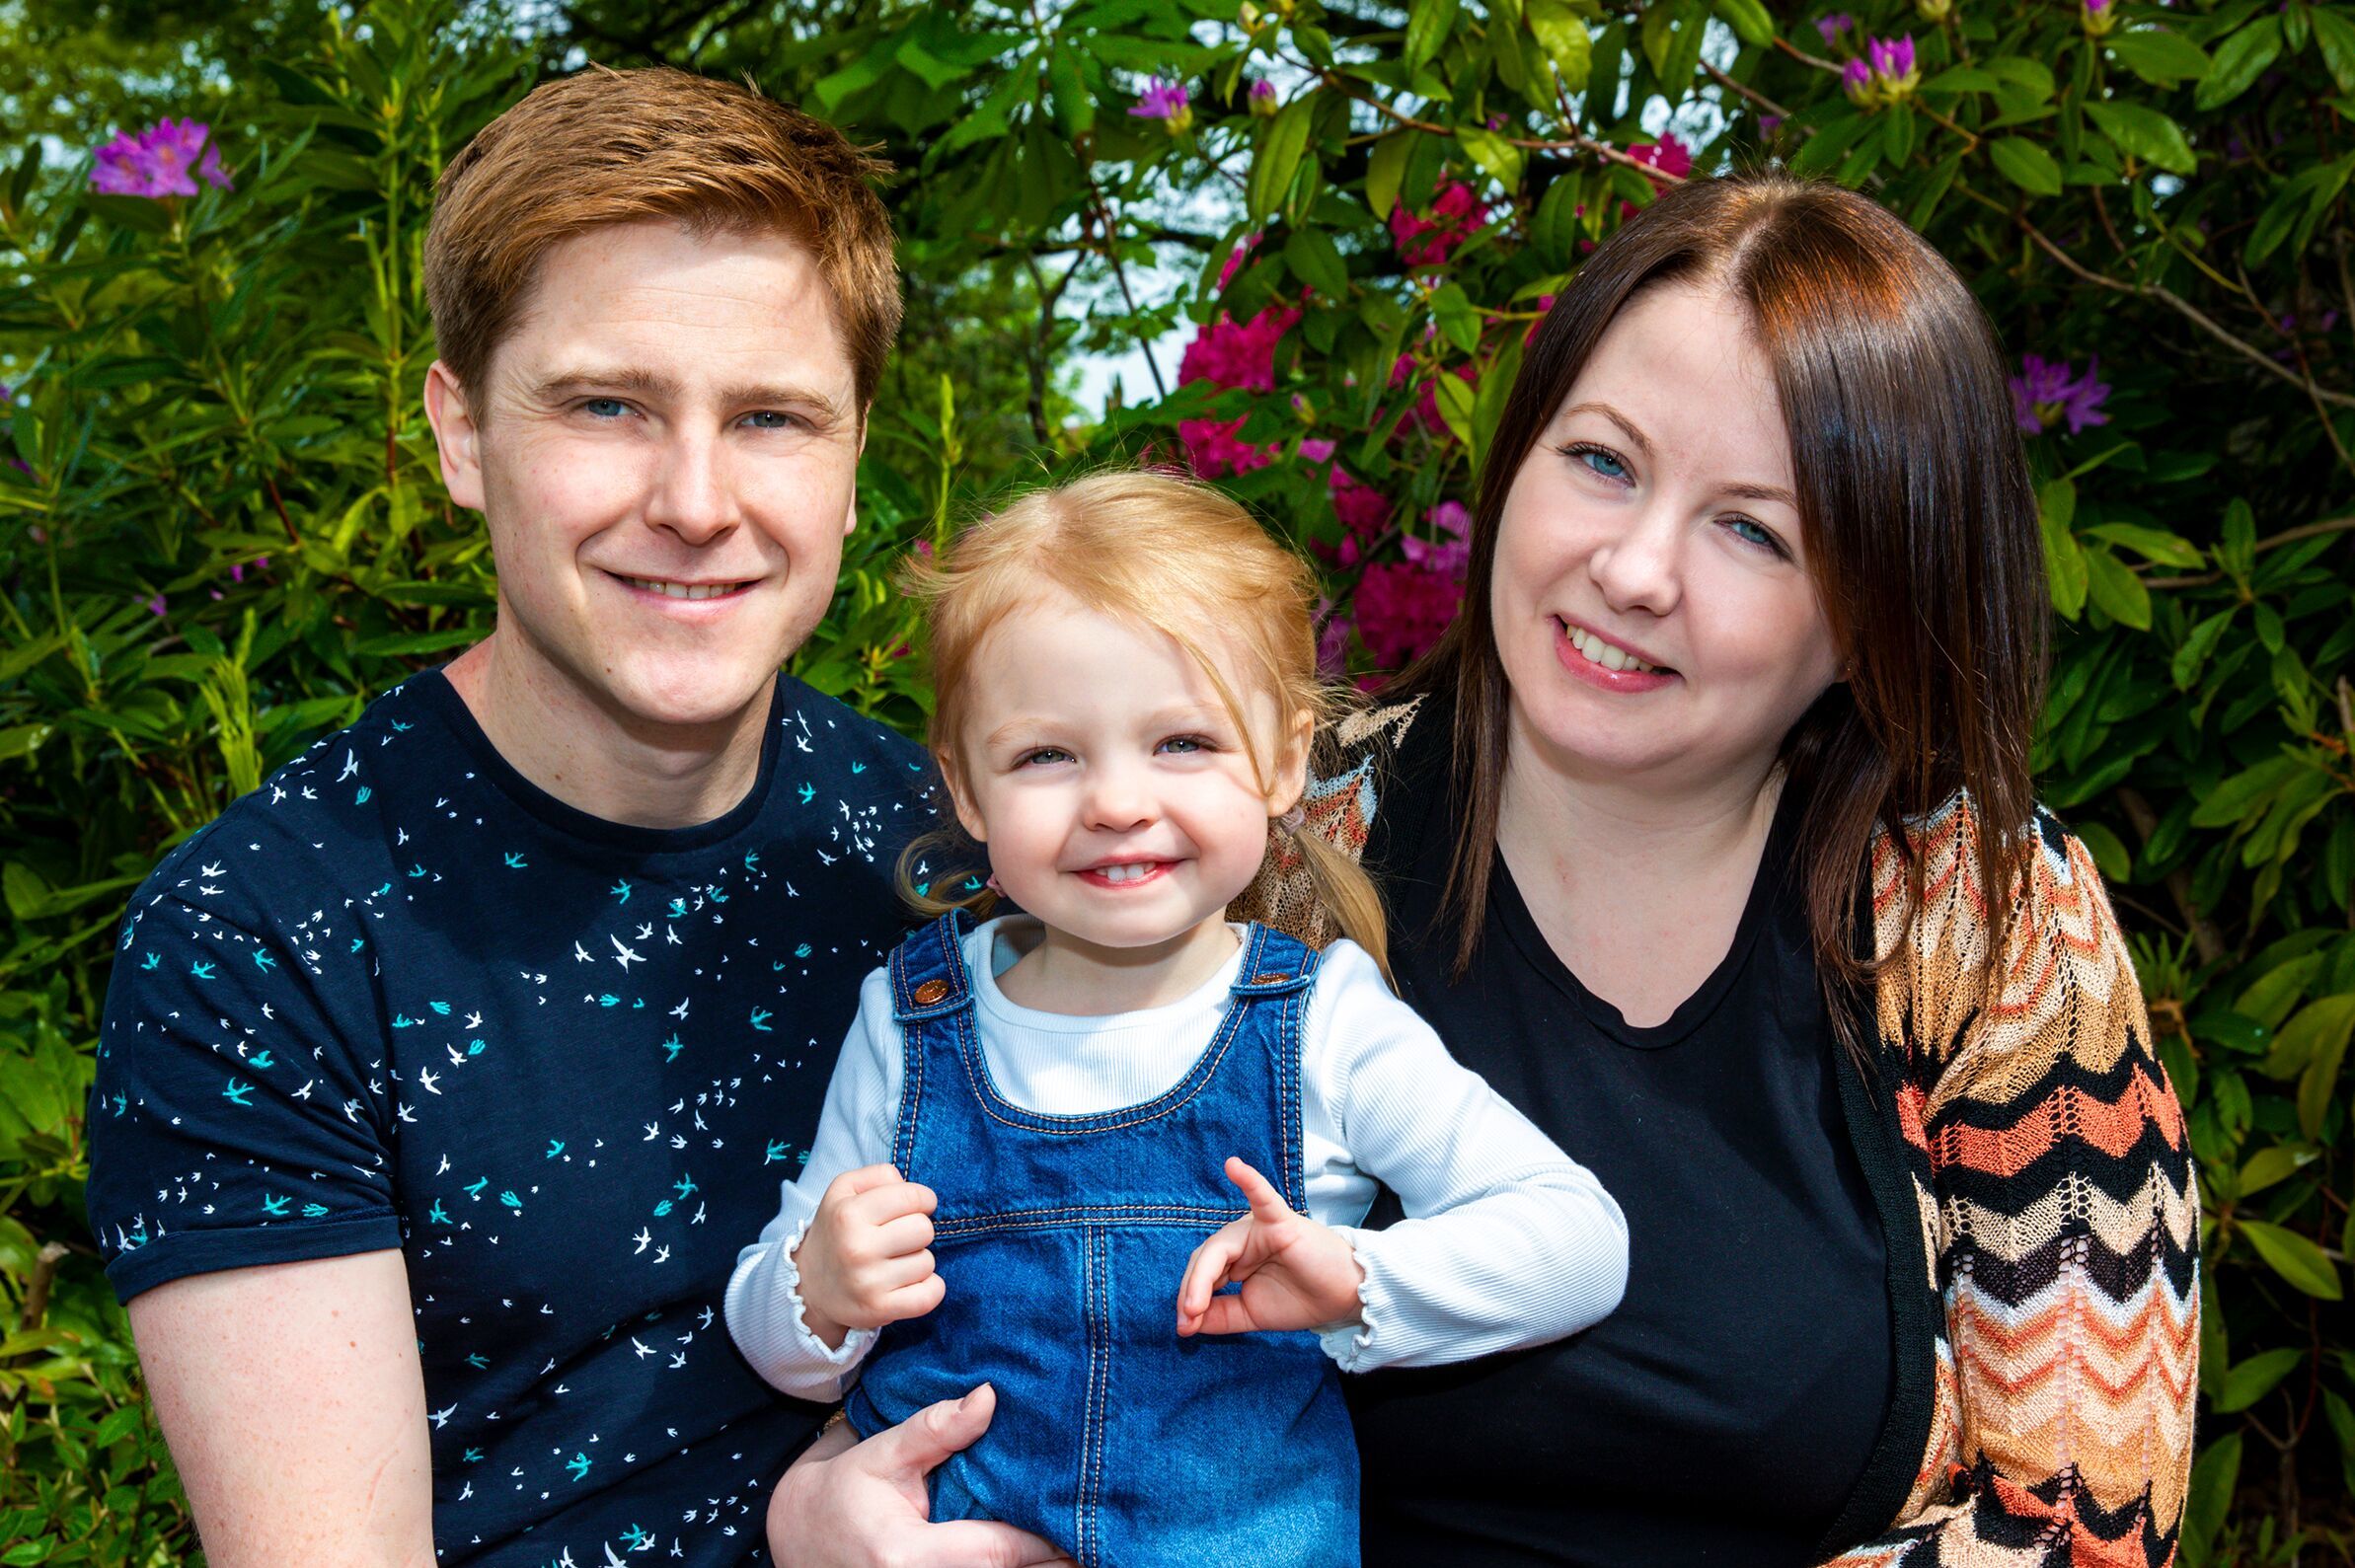 Meet the man who became a father after being diagnosed with cancer at just 24